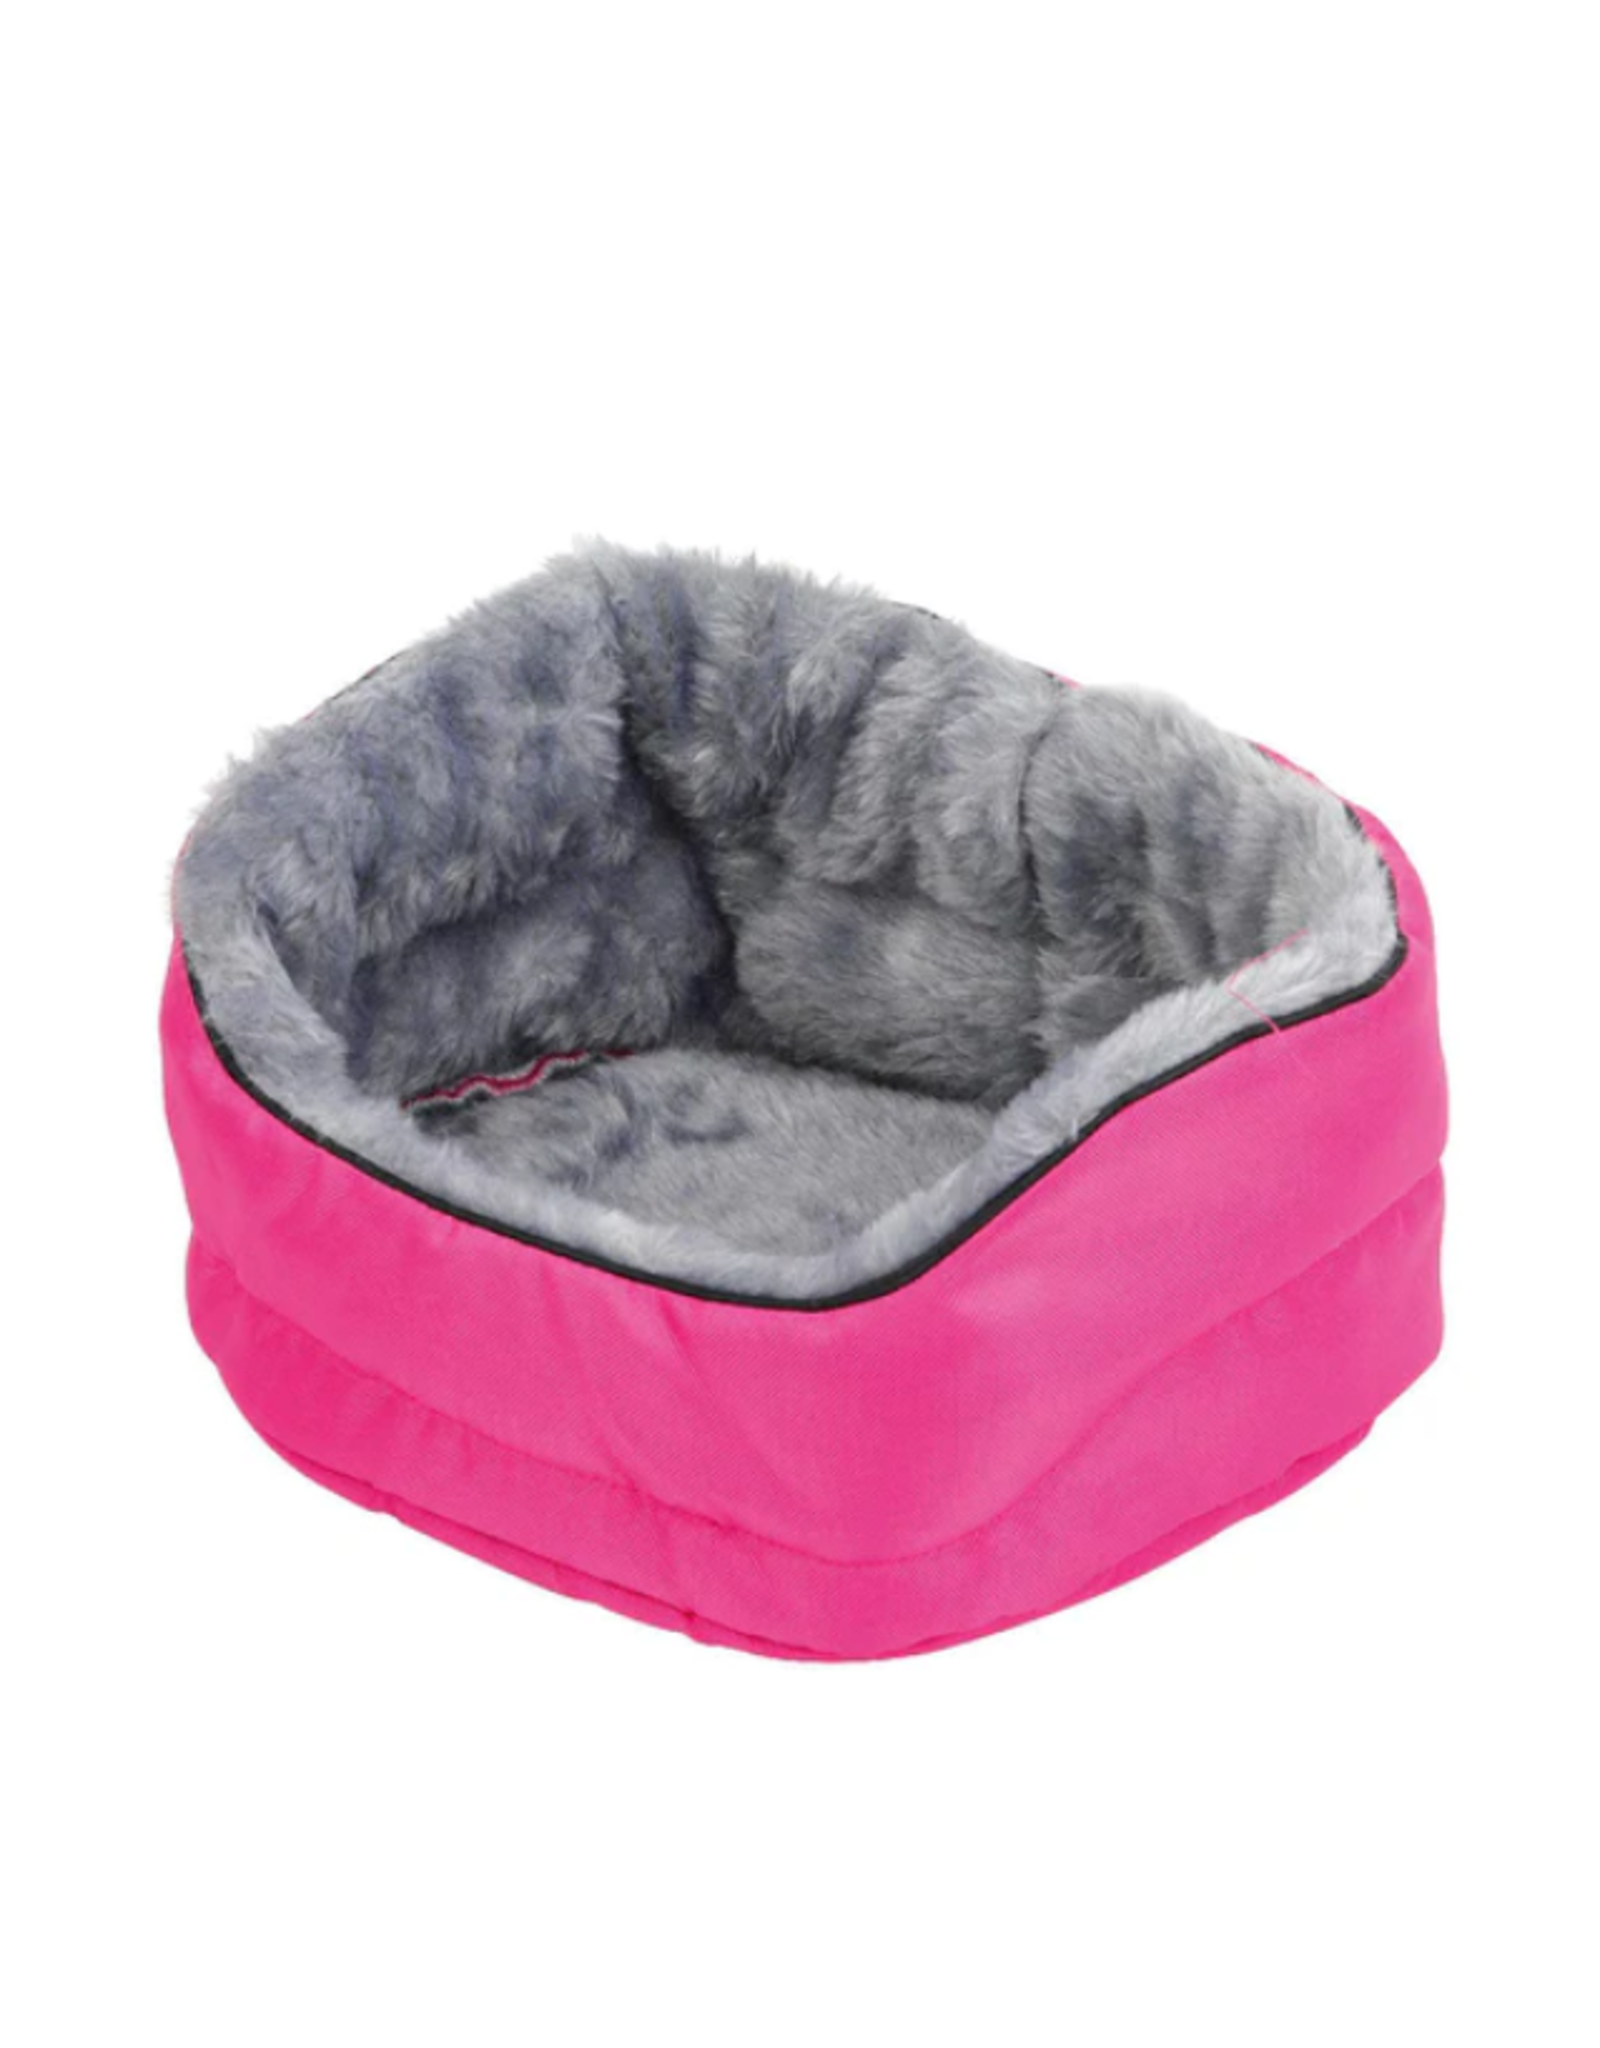 Sky Pet Products Small Animal Cuddle Bed